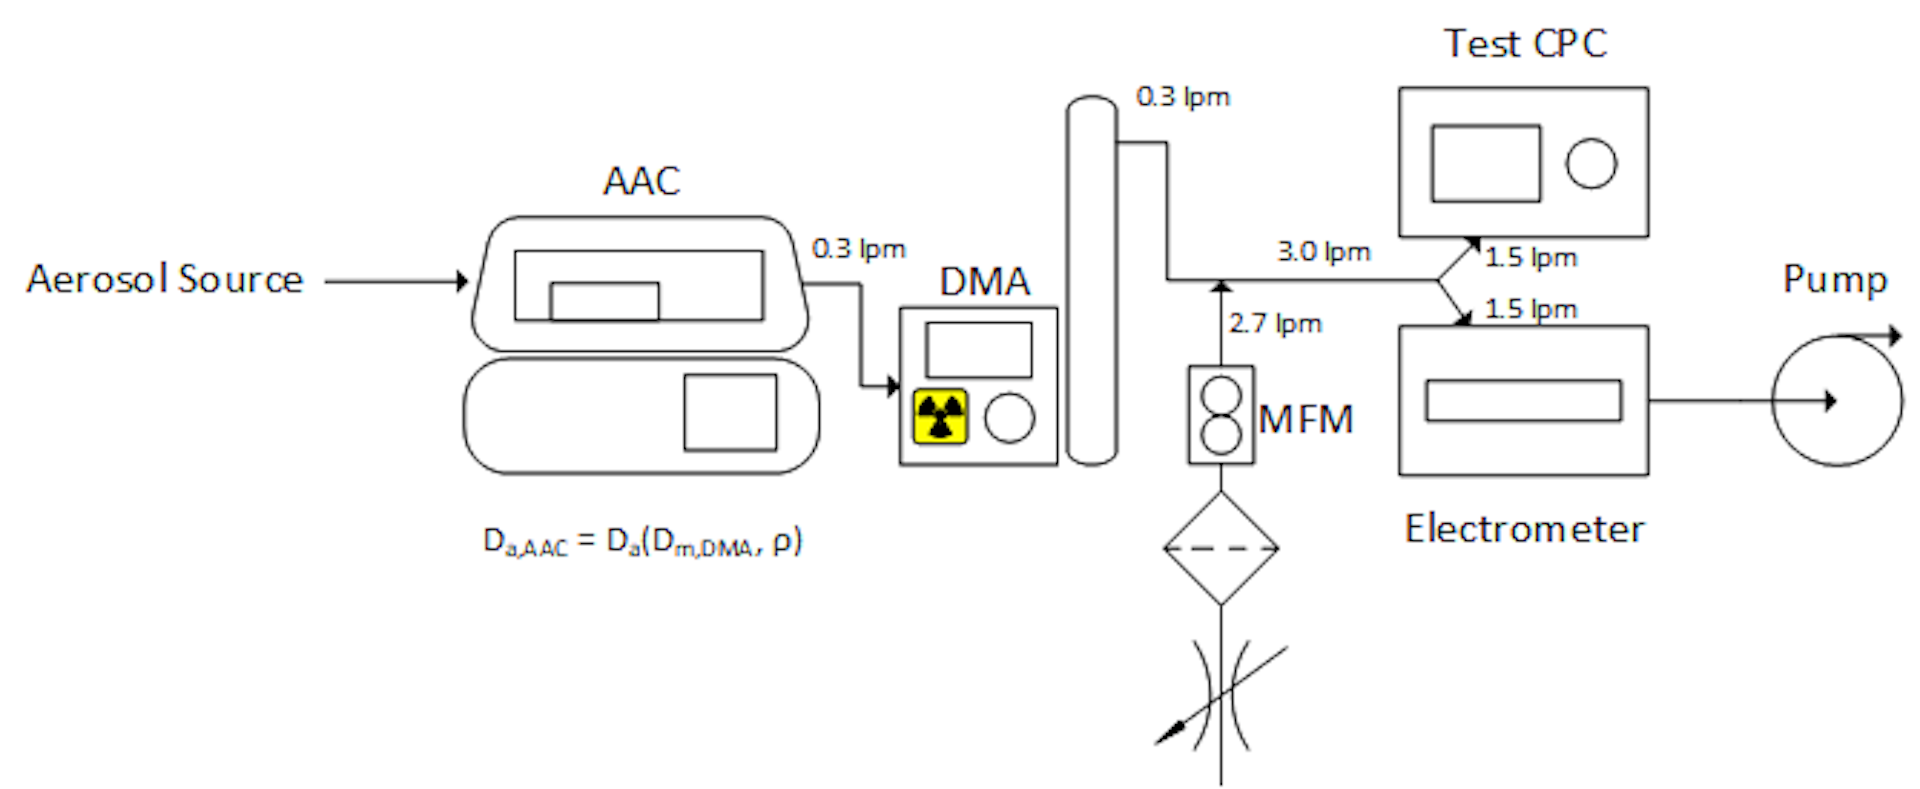 Using an AAC as a pre-classifier for CPC calibration against an Electrometer ISO 27891